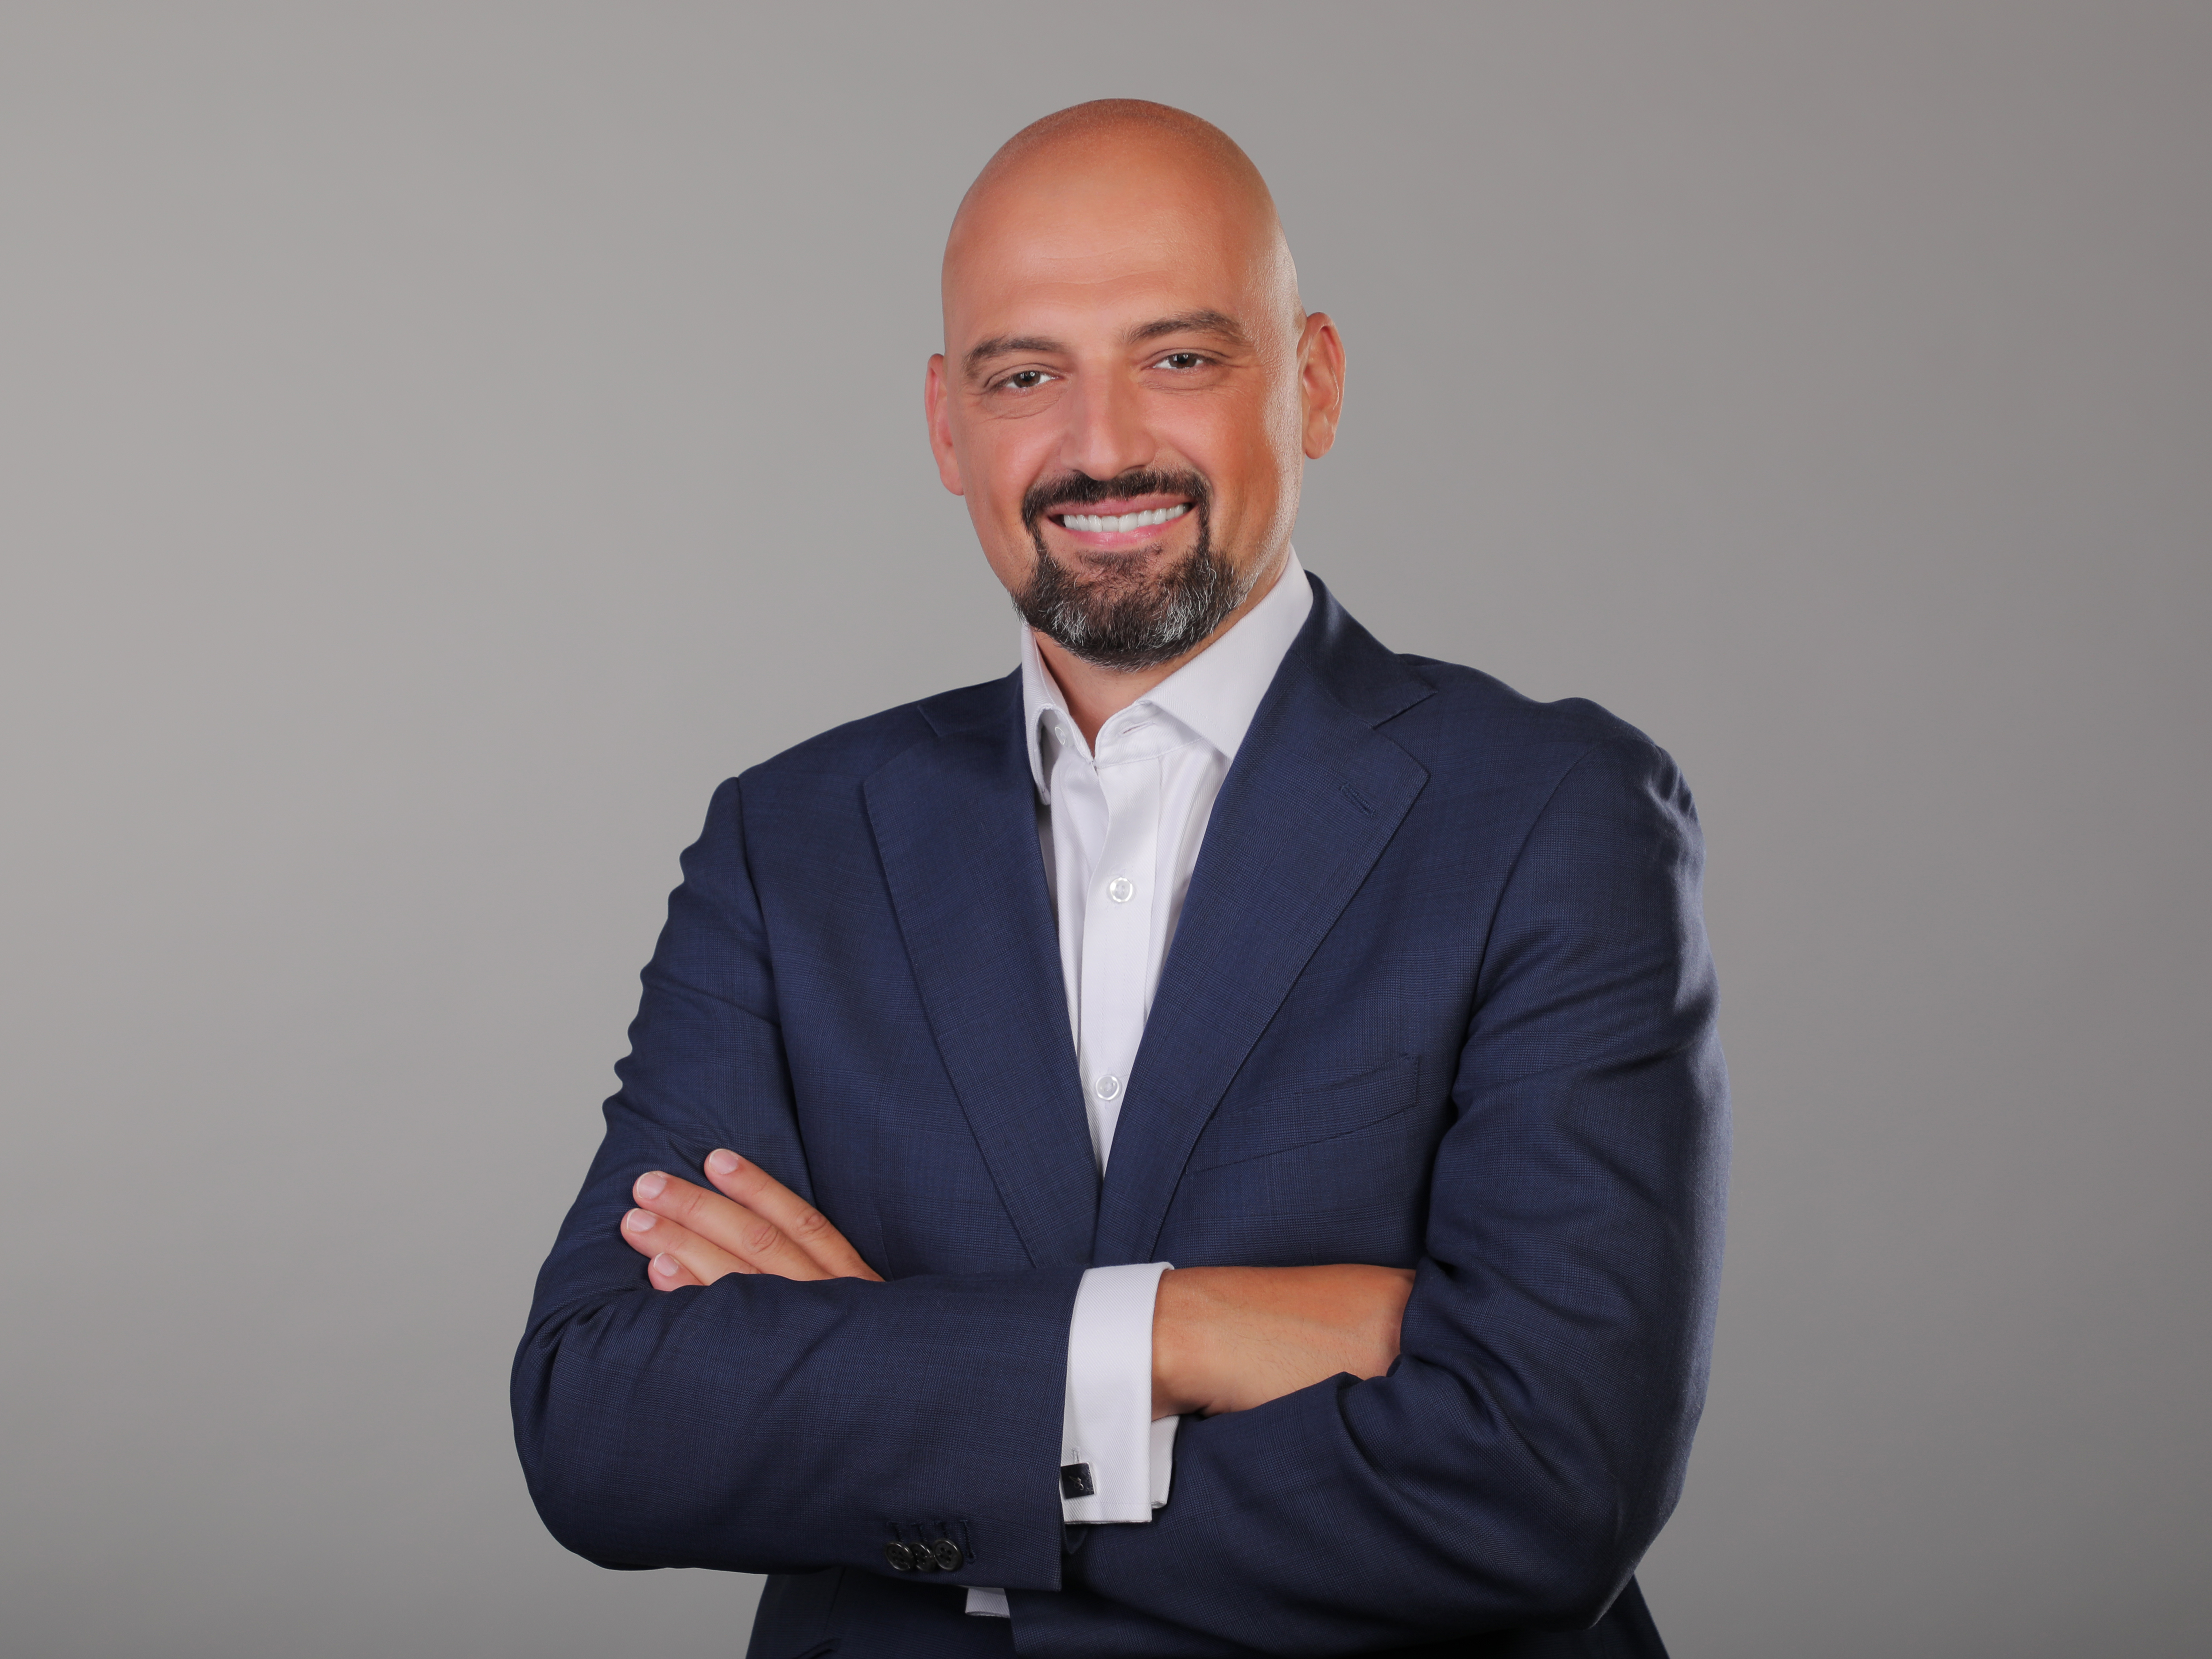 Sasa Markovic is the new General Manager of Coca-Cola HBC Bulgaria